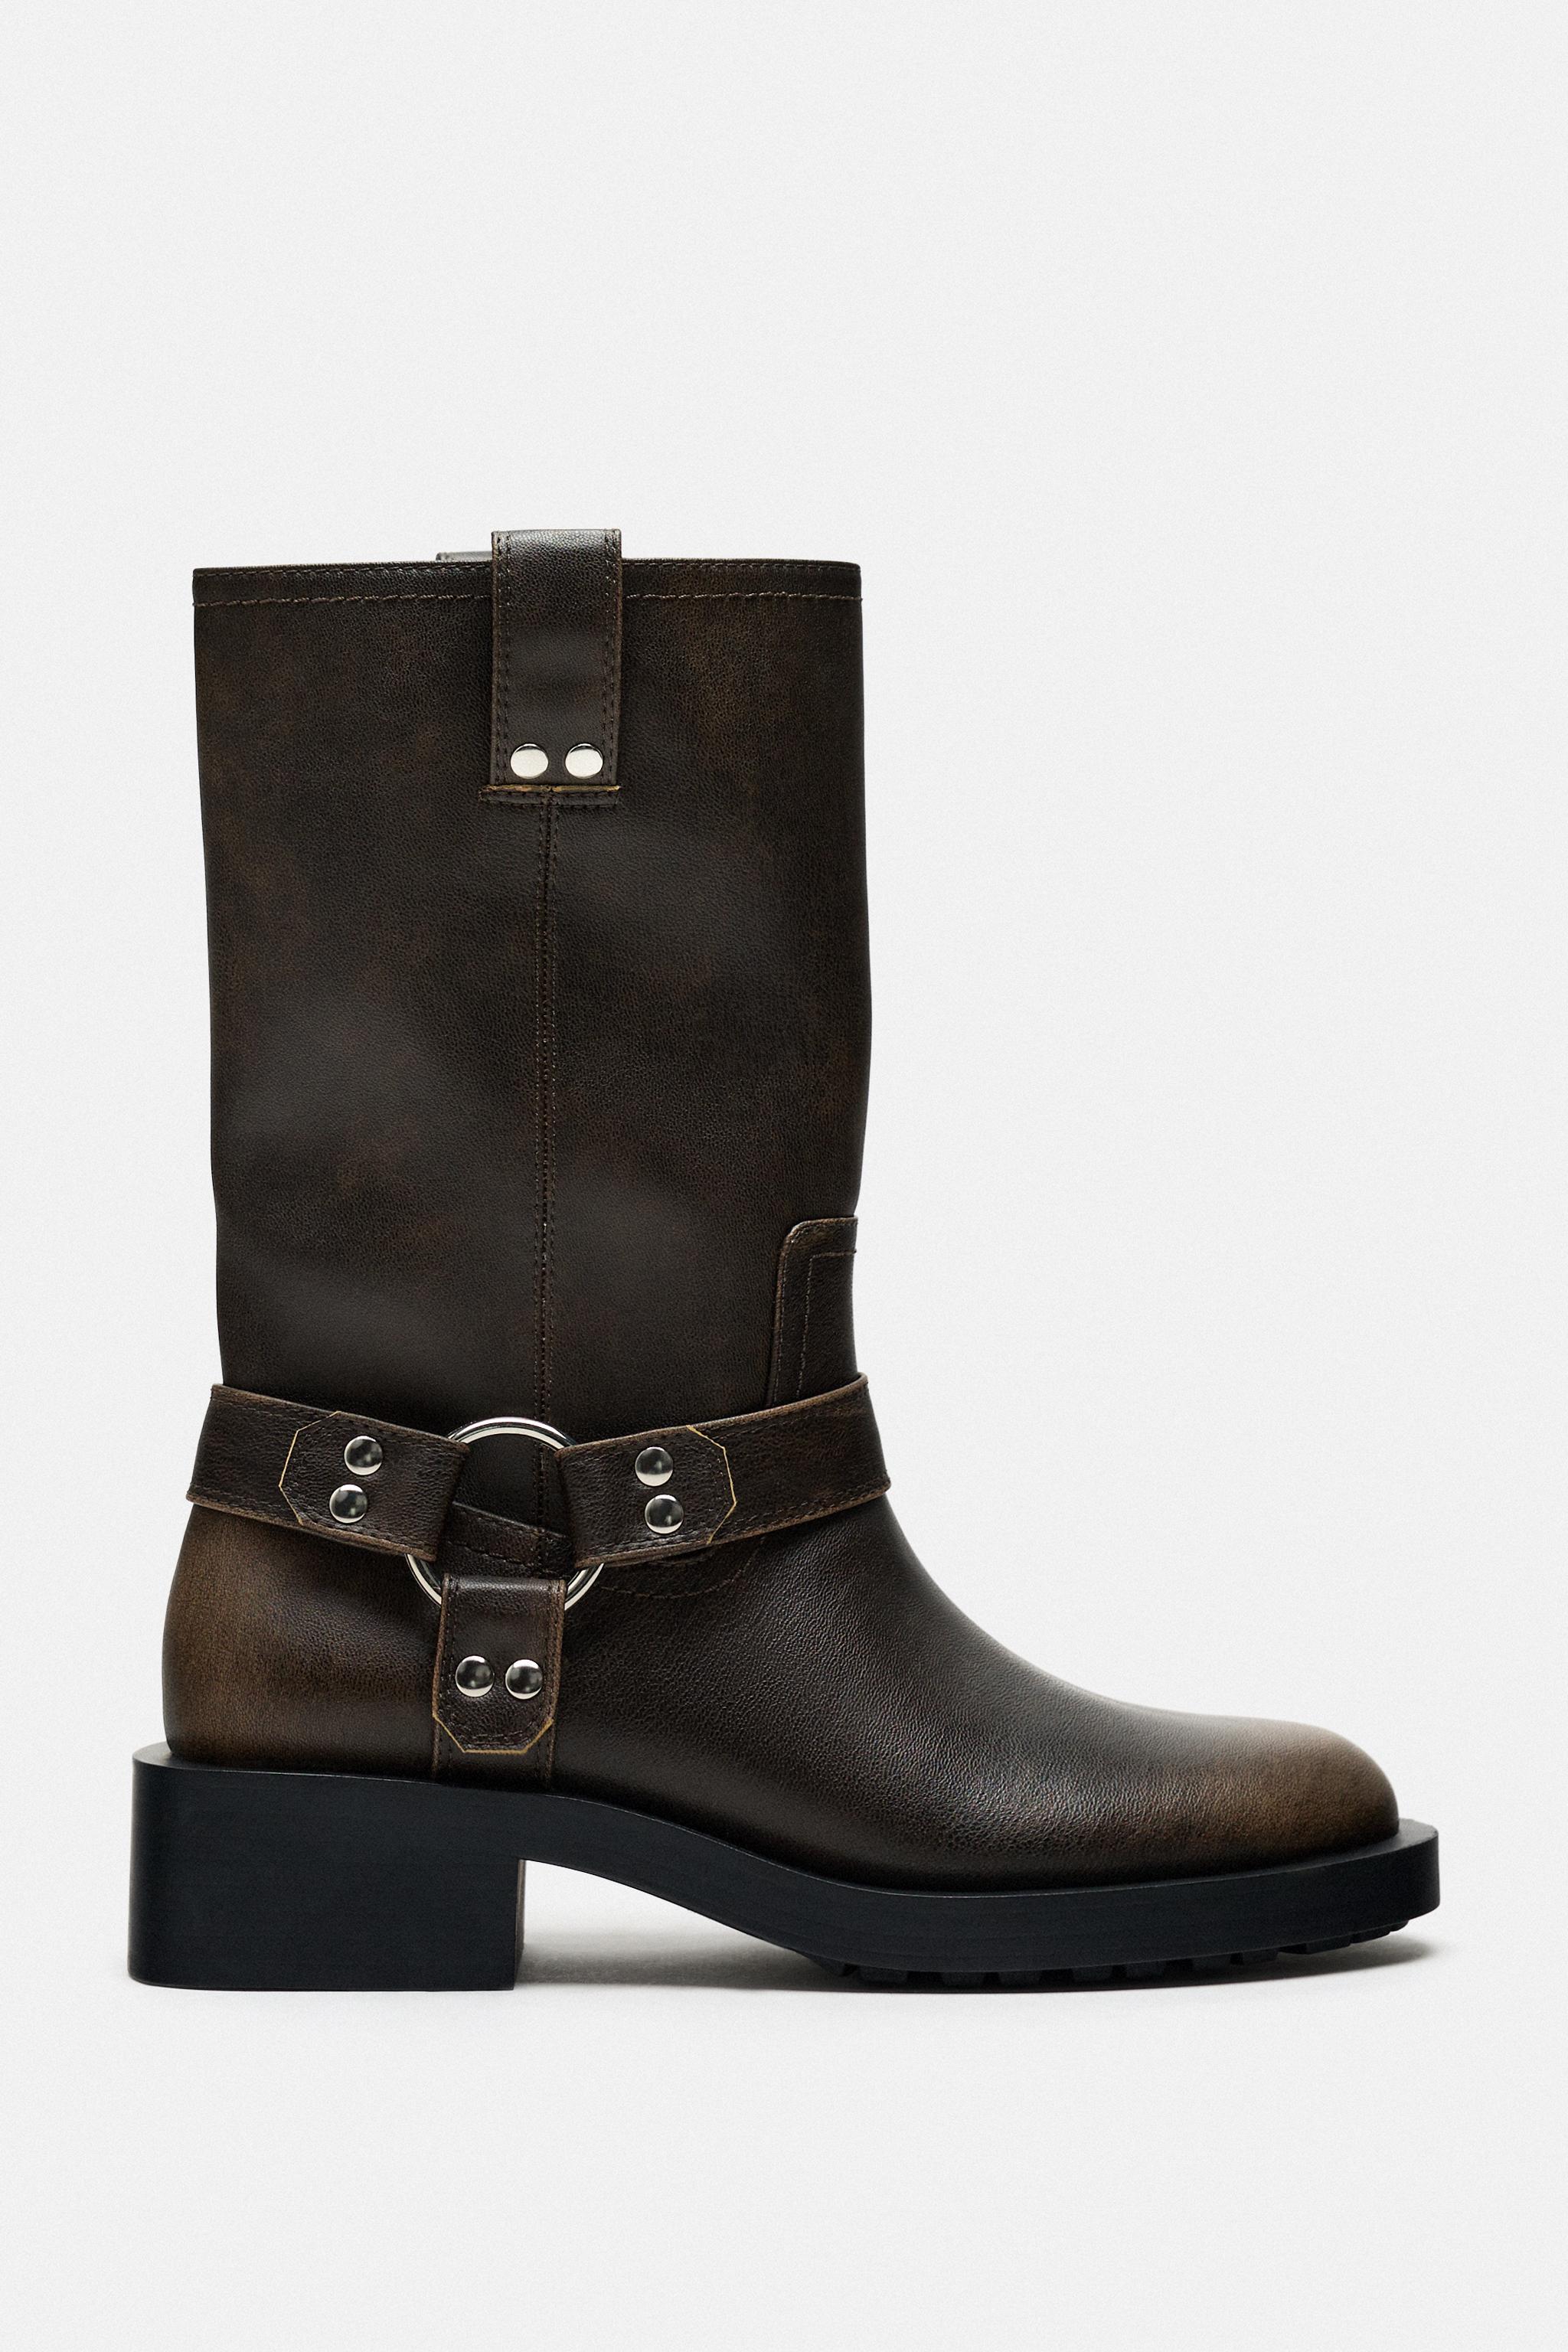 Women's Buckle Ankle Boots | Explore our New Arrivals | ZARA 